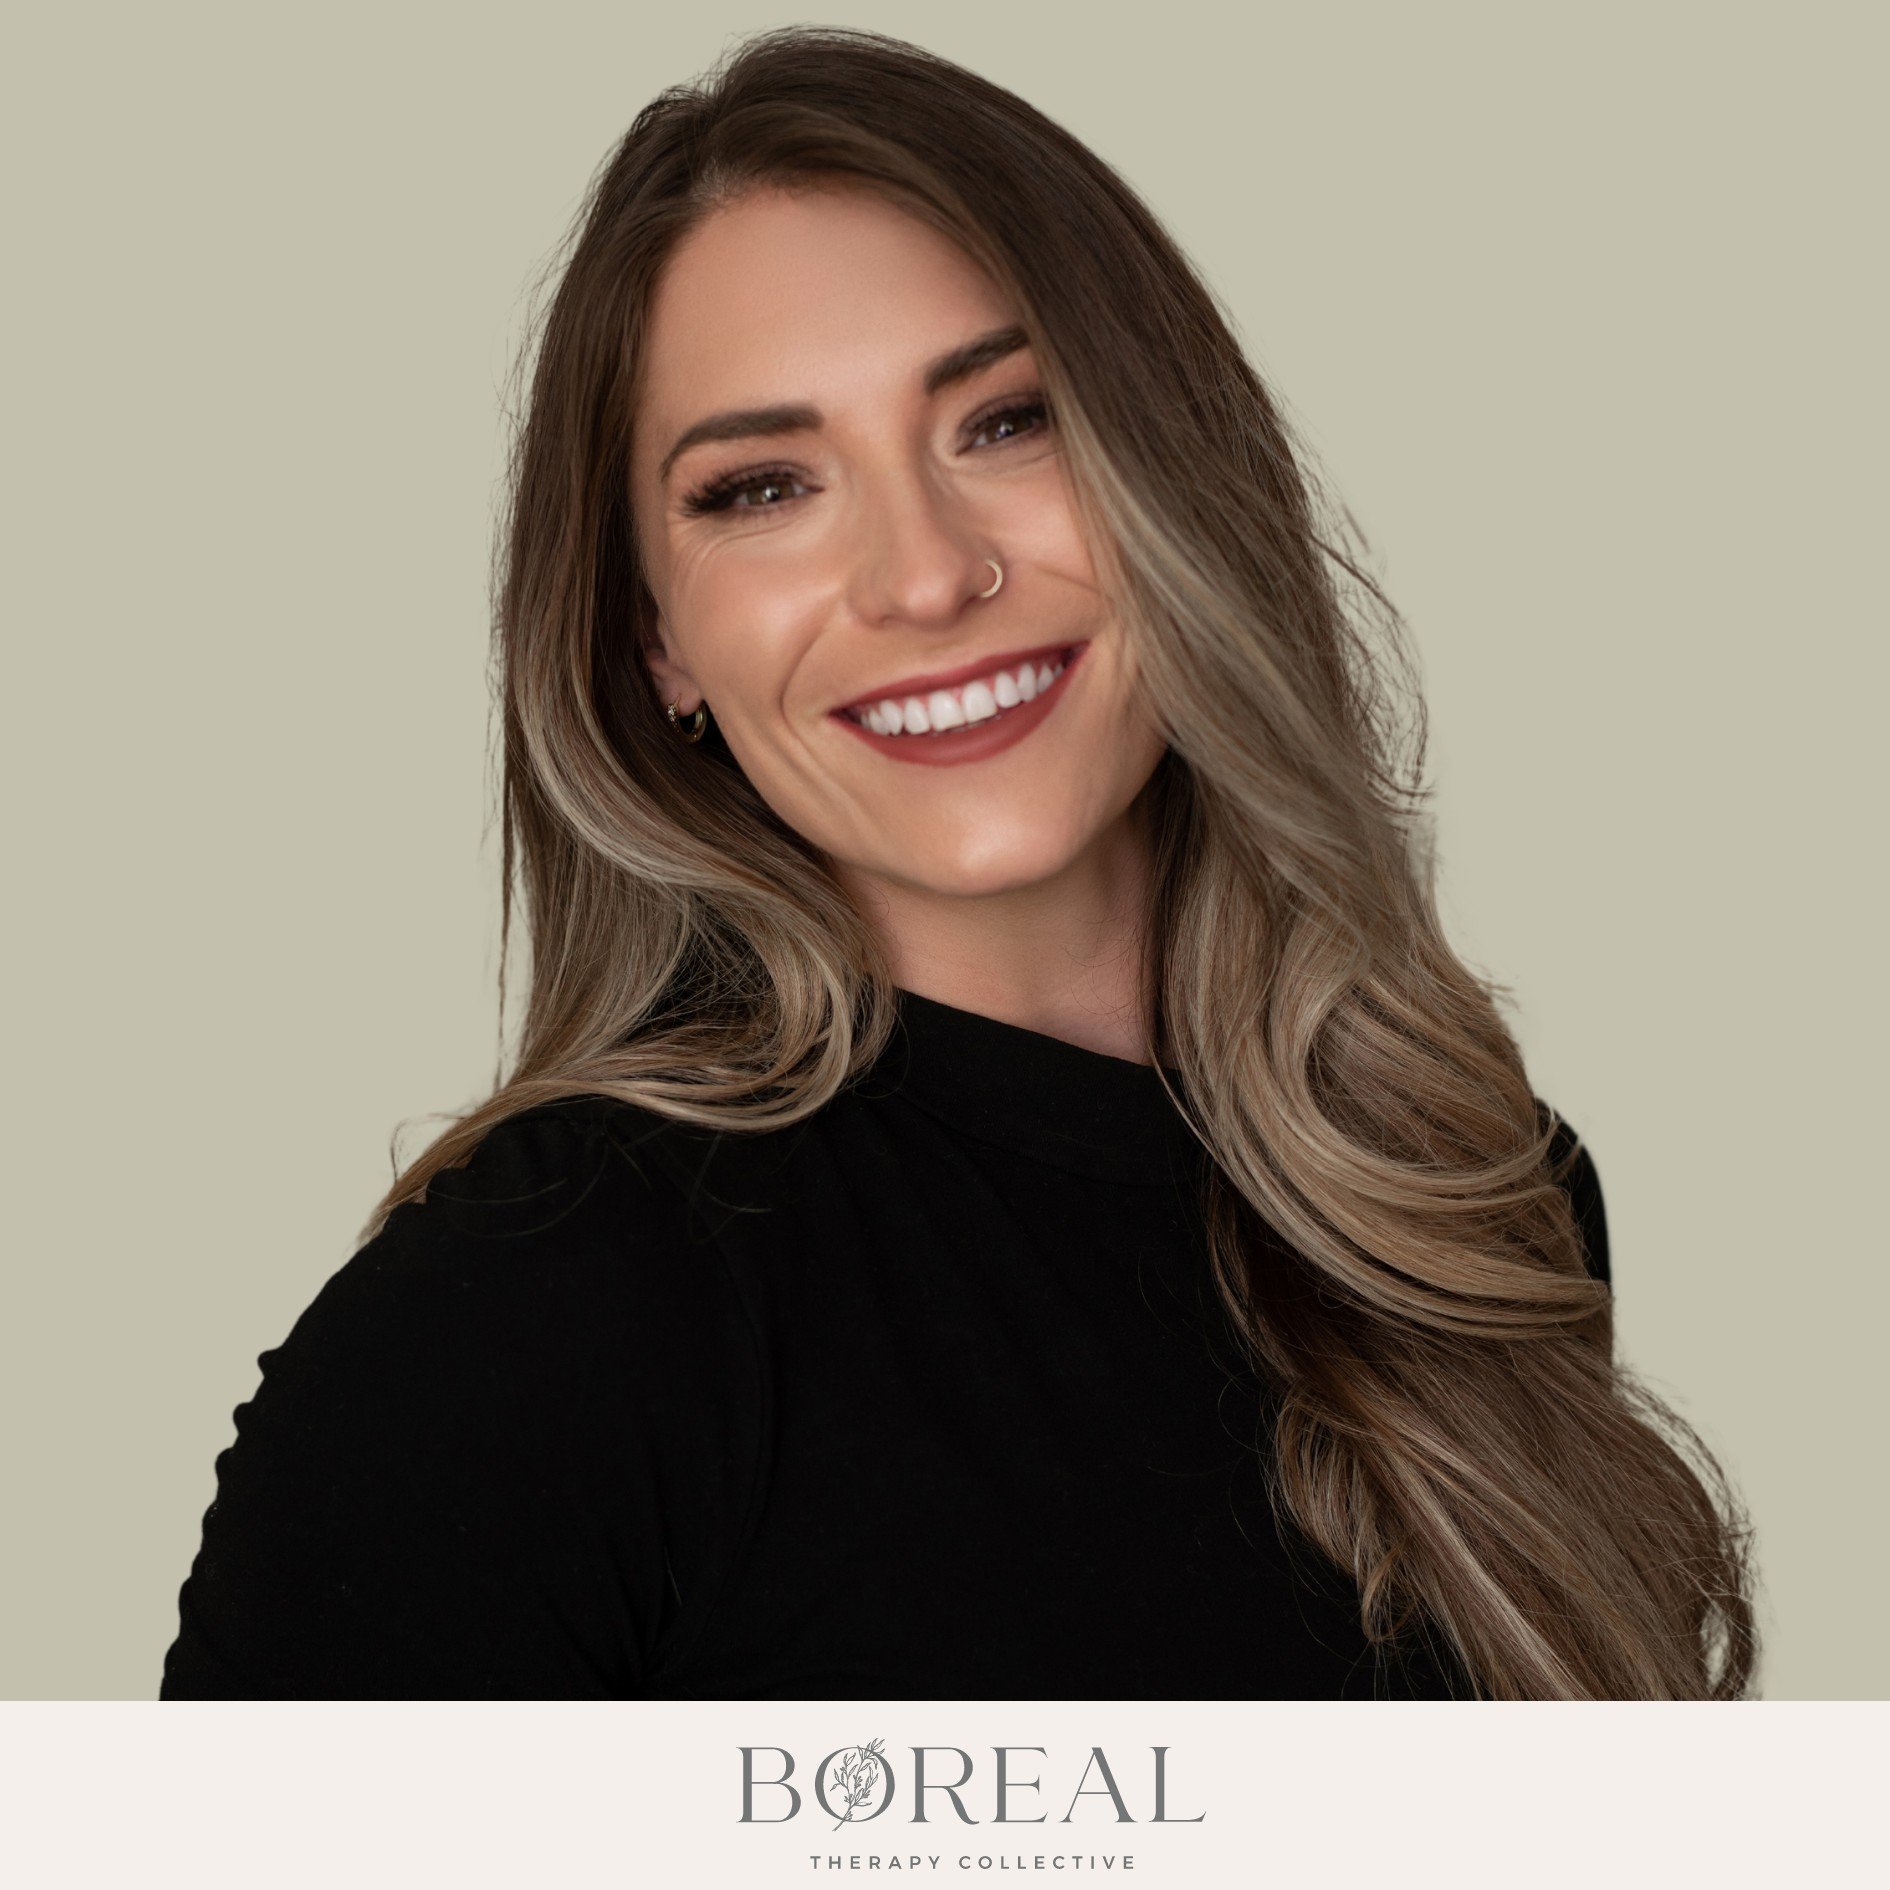 Meet one of our new therapists, Sarah Callin!

Sarah was raised in the beautiful Okanagan Valley - the traditional, ancestral, and unceded land of the Syilx Okanagan people. Life in the vibrant landscapes of British Columbia brought Sarah a deep appr